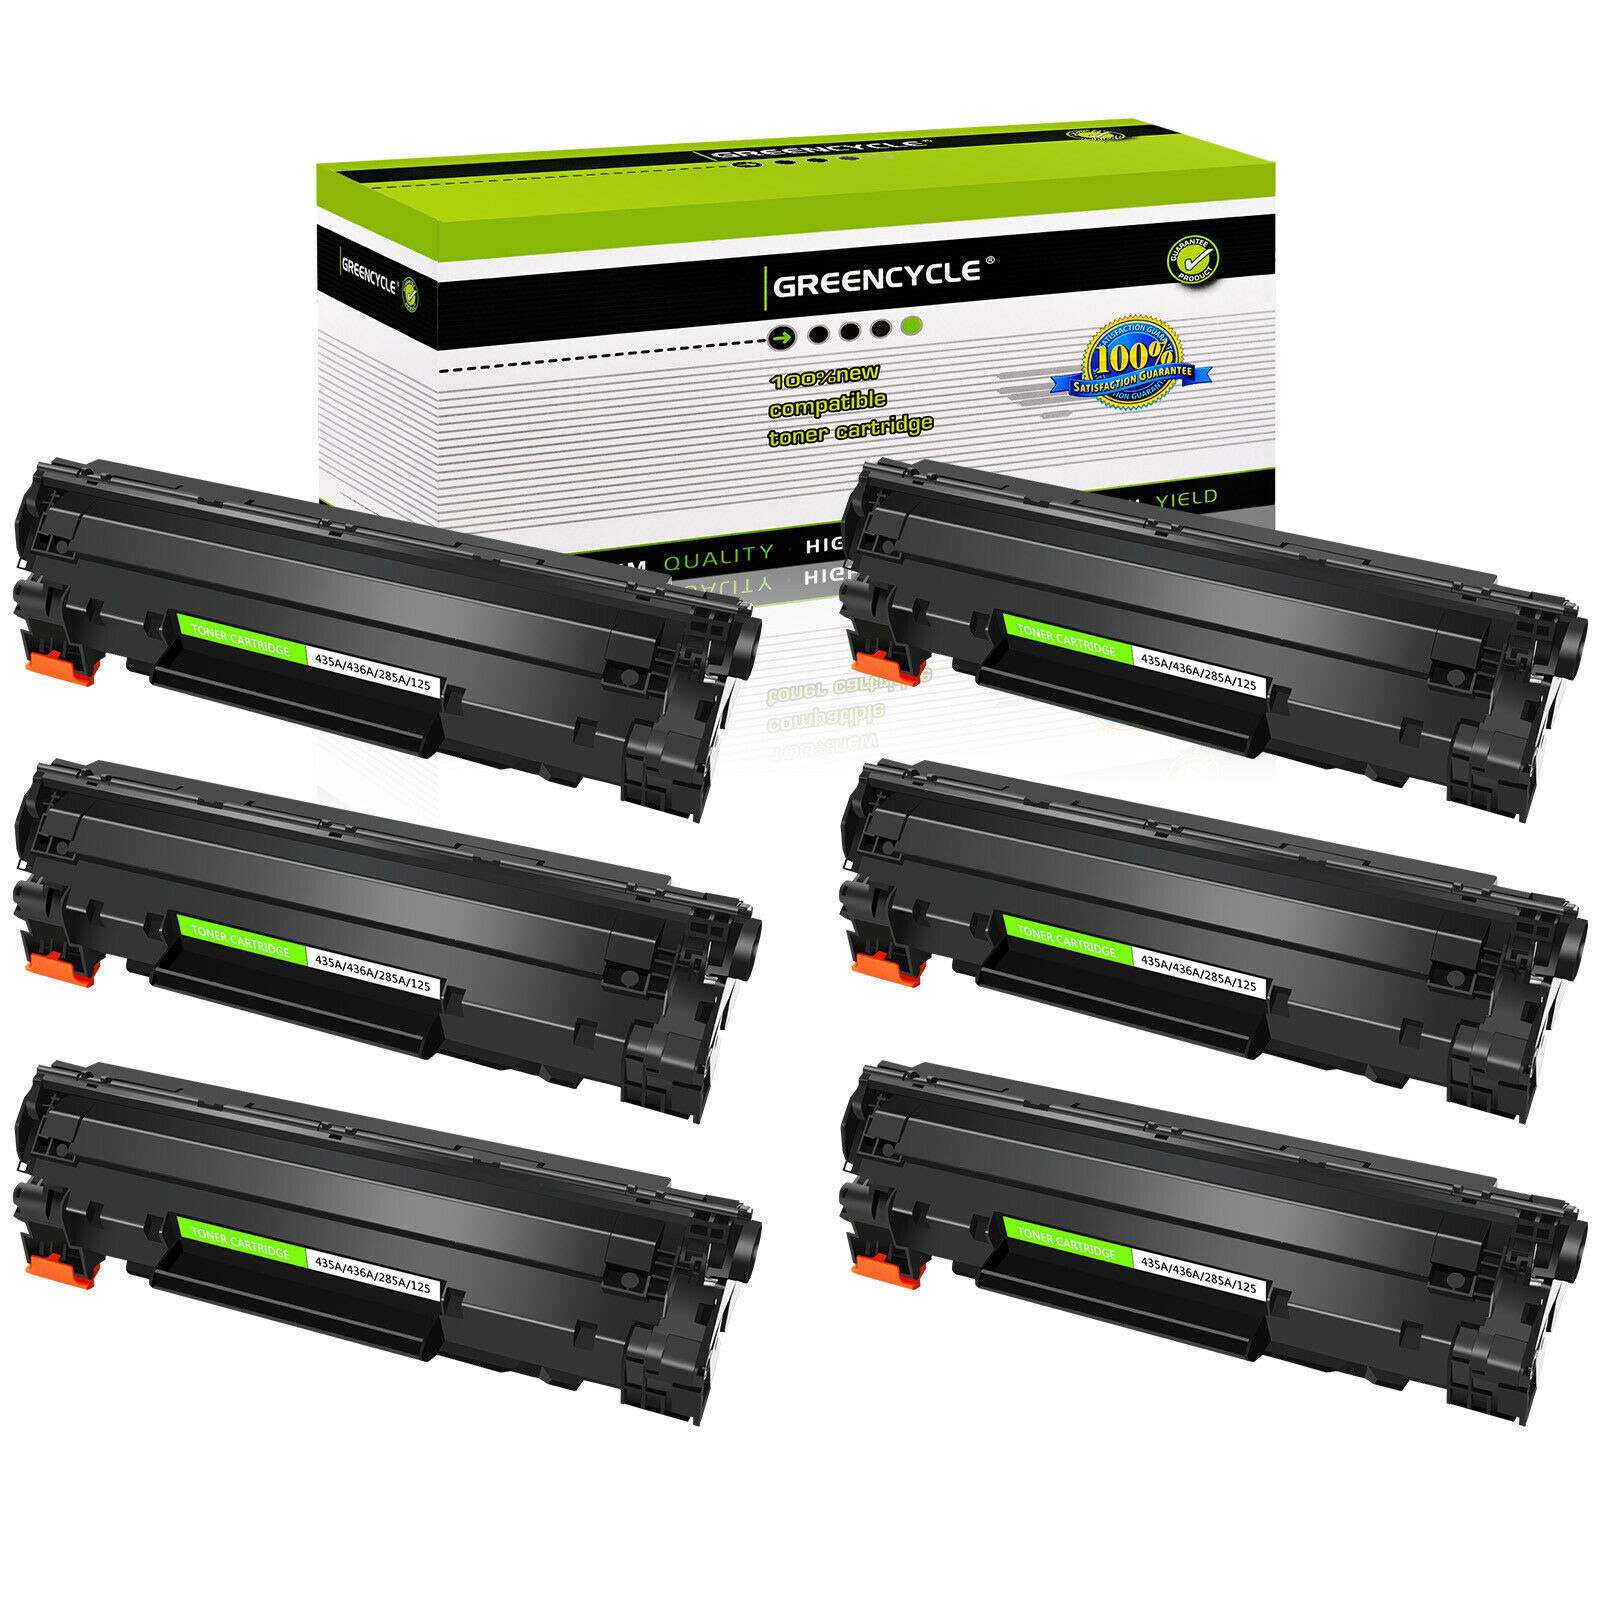 6PK Greencycle Toner Cartridge Compatible for HP 36a CB436A LaserJet M1522nf MFP